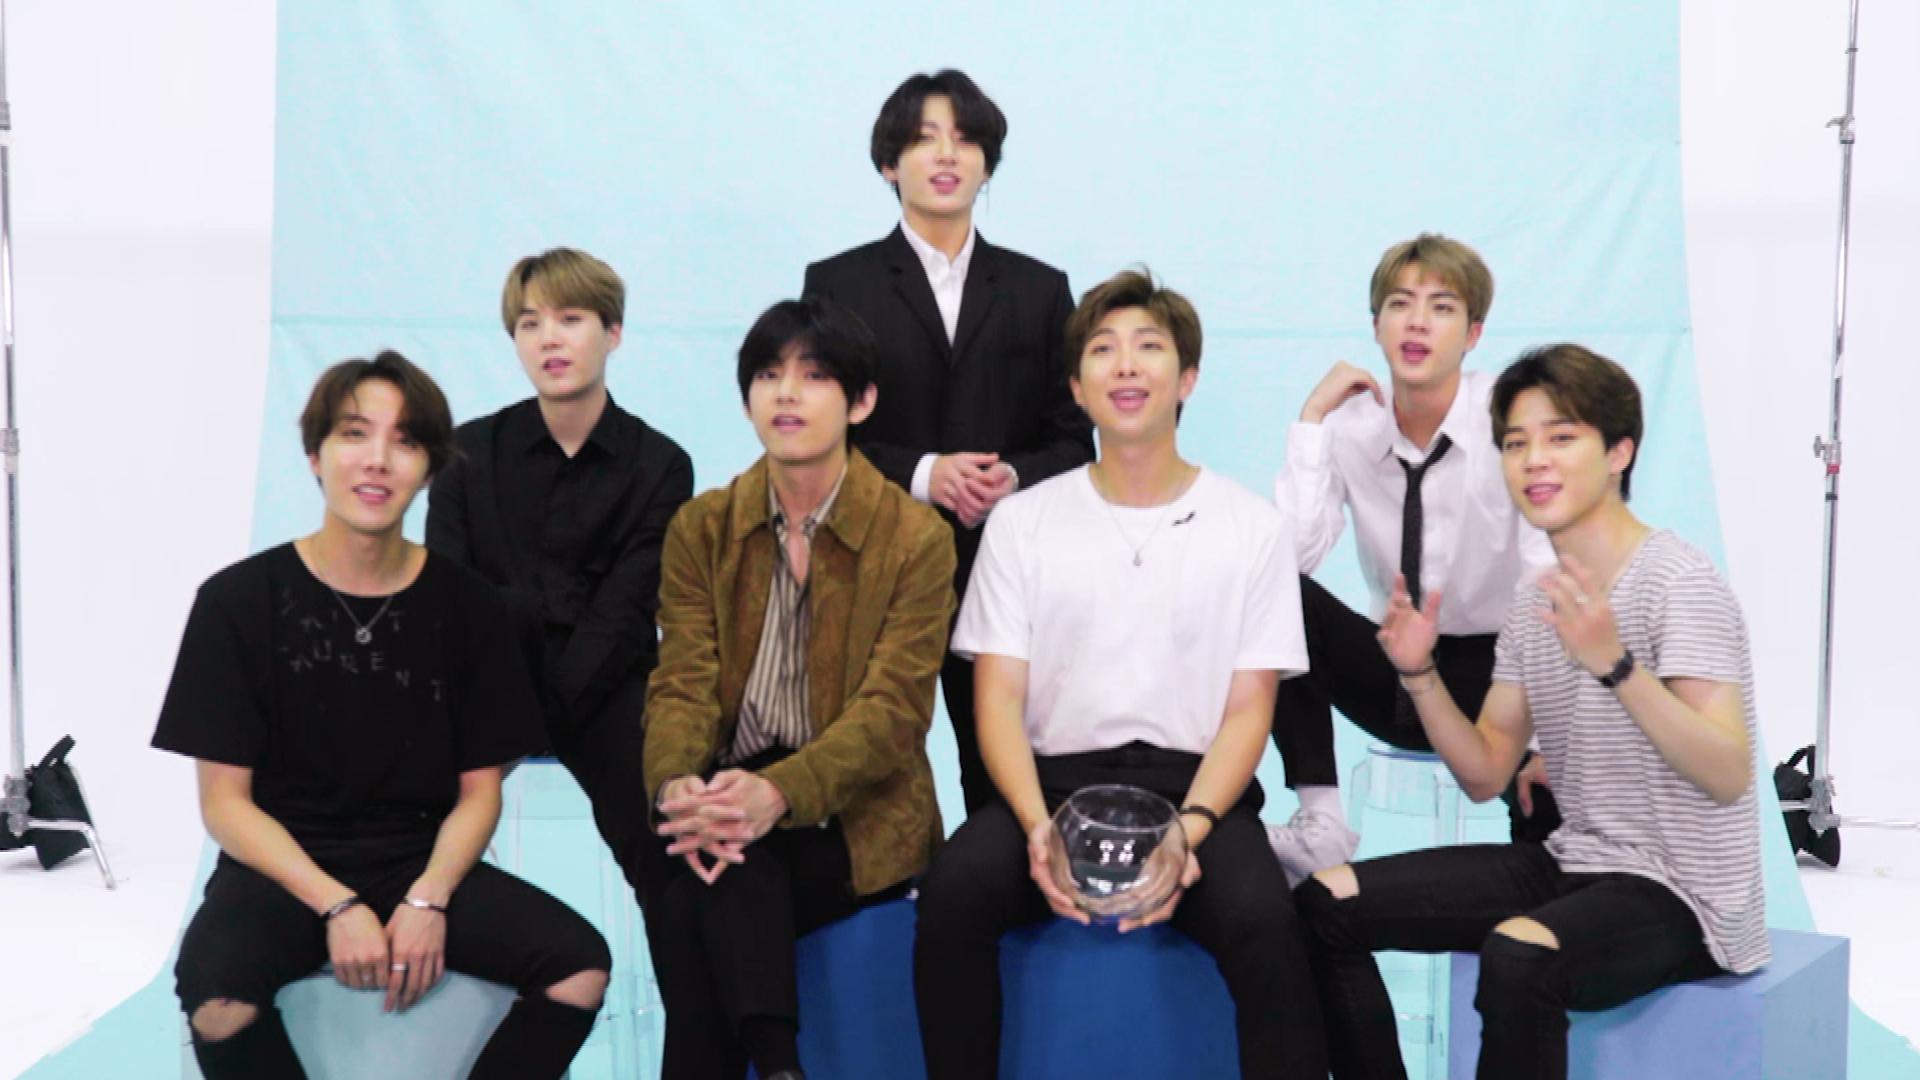 BTS Releases 'Map of the Soul: 7' Album and 'On' Music Video |  Entertainment Tonight